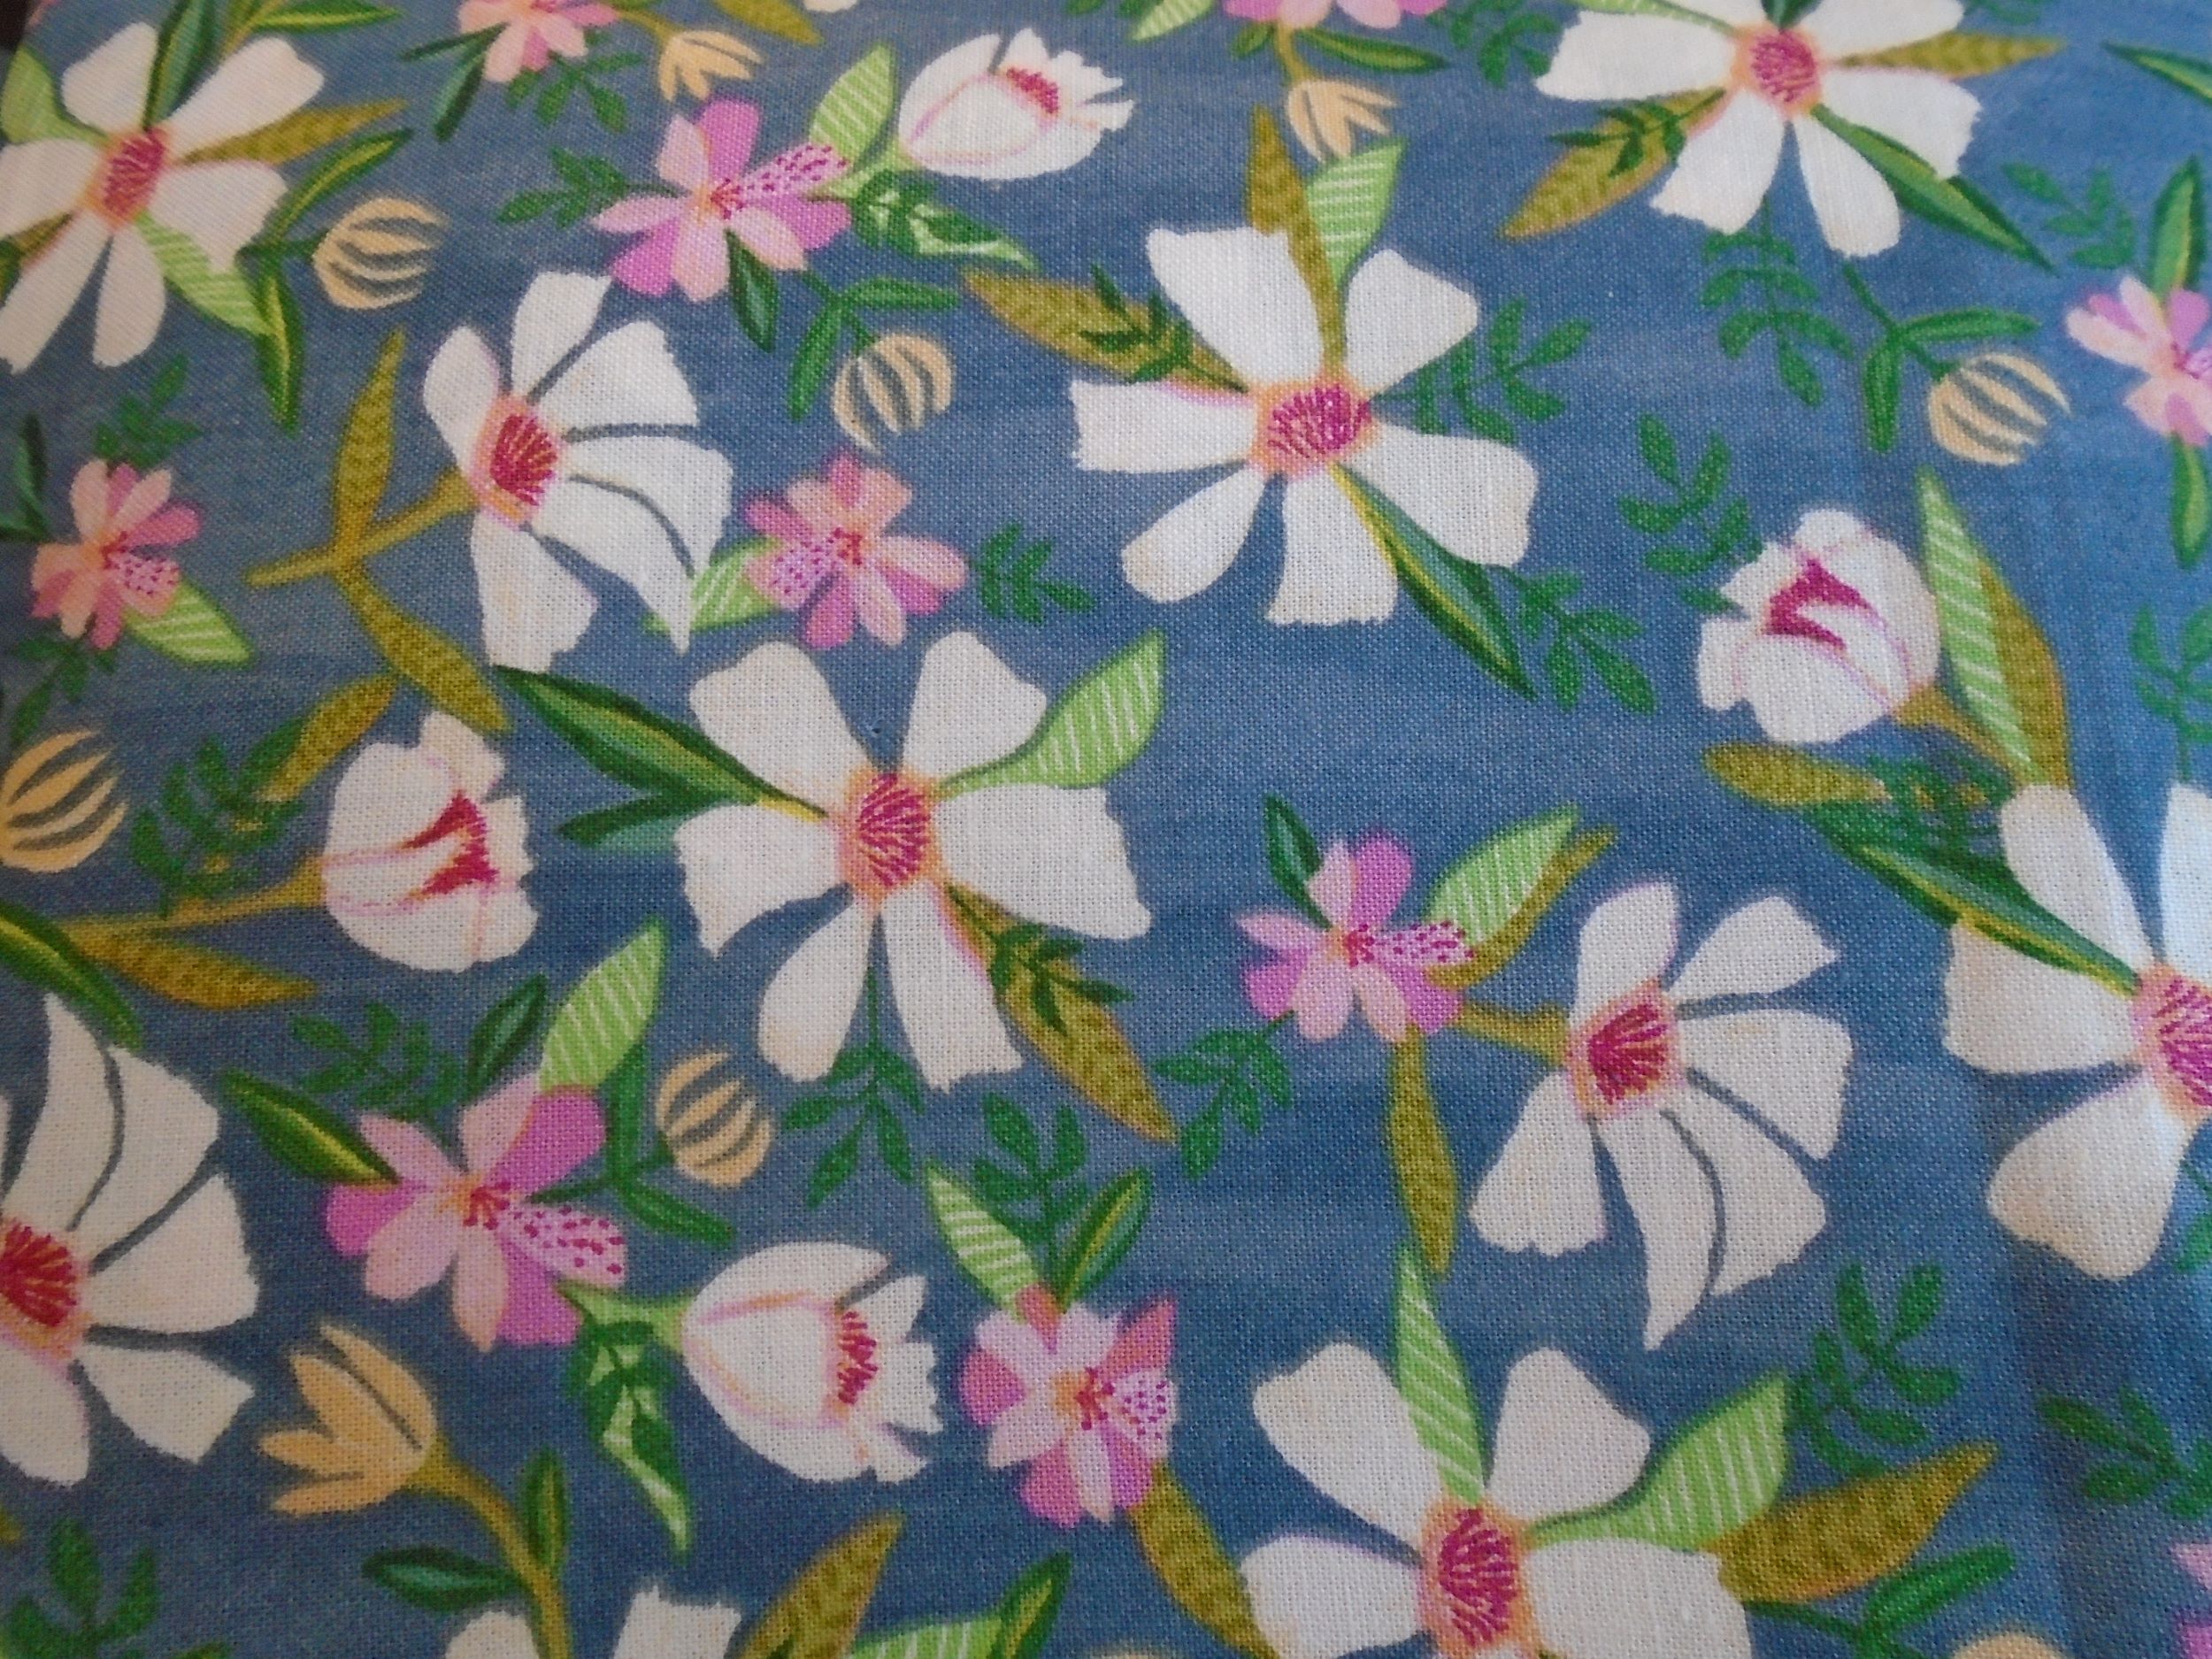 Blush and Bloom Fabric Blue/Gray Fabric with White Flowers 5 yards ...